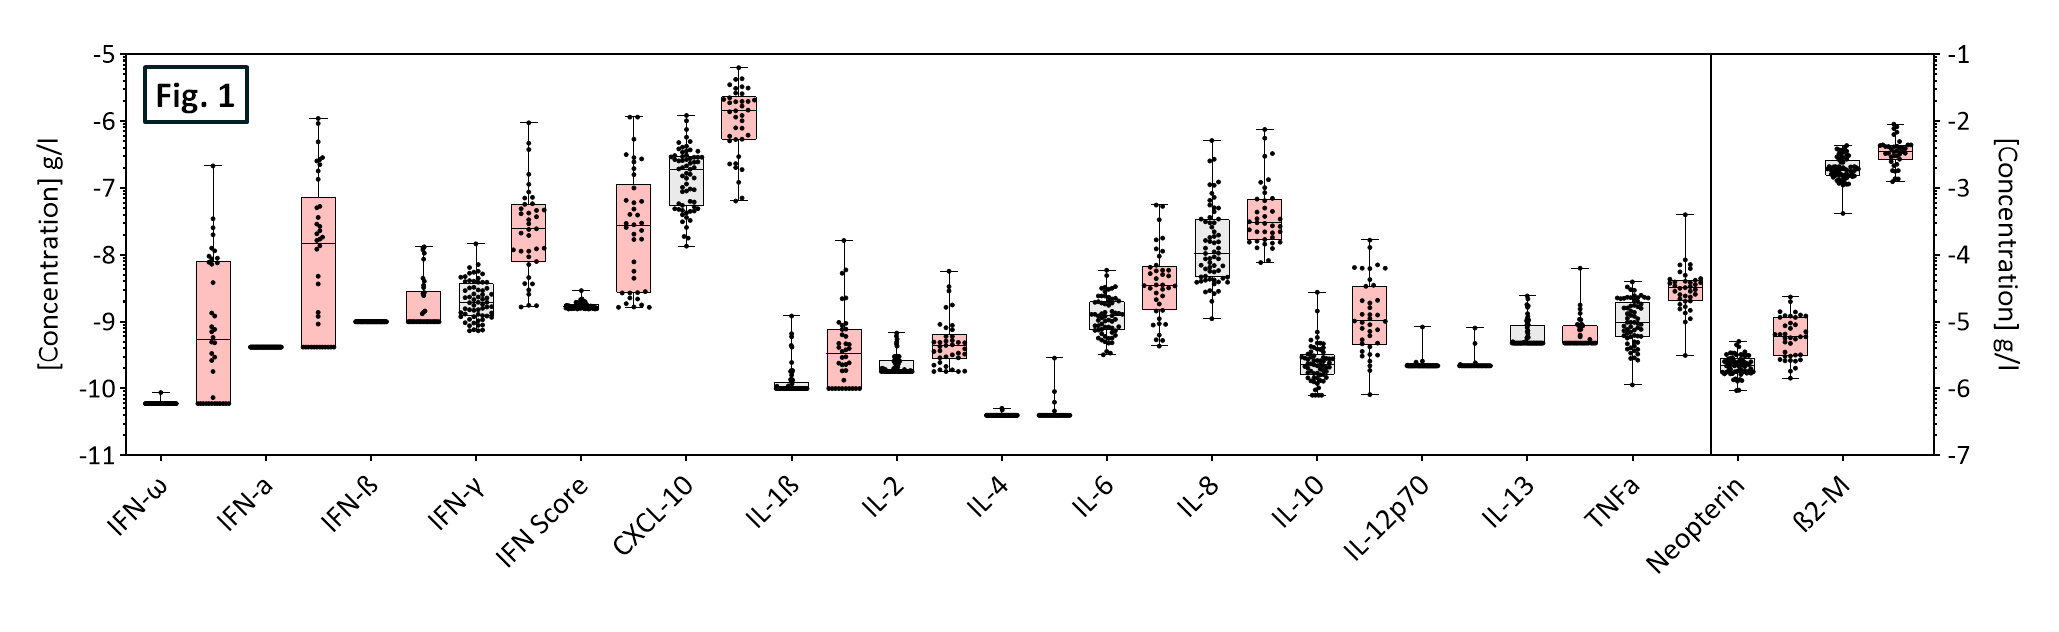 Healthy and Influenza Scatter plots